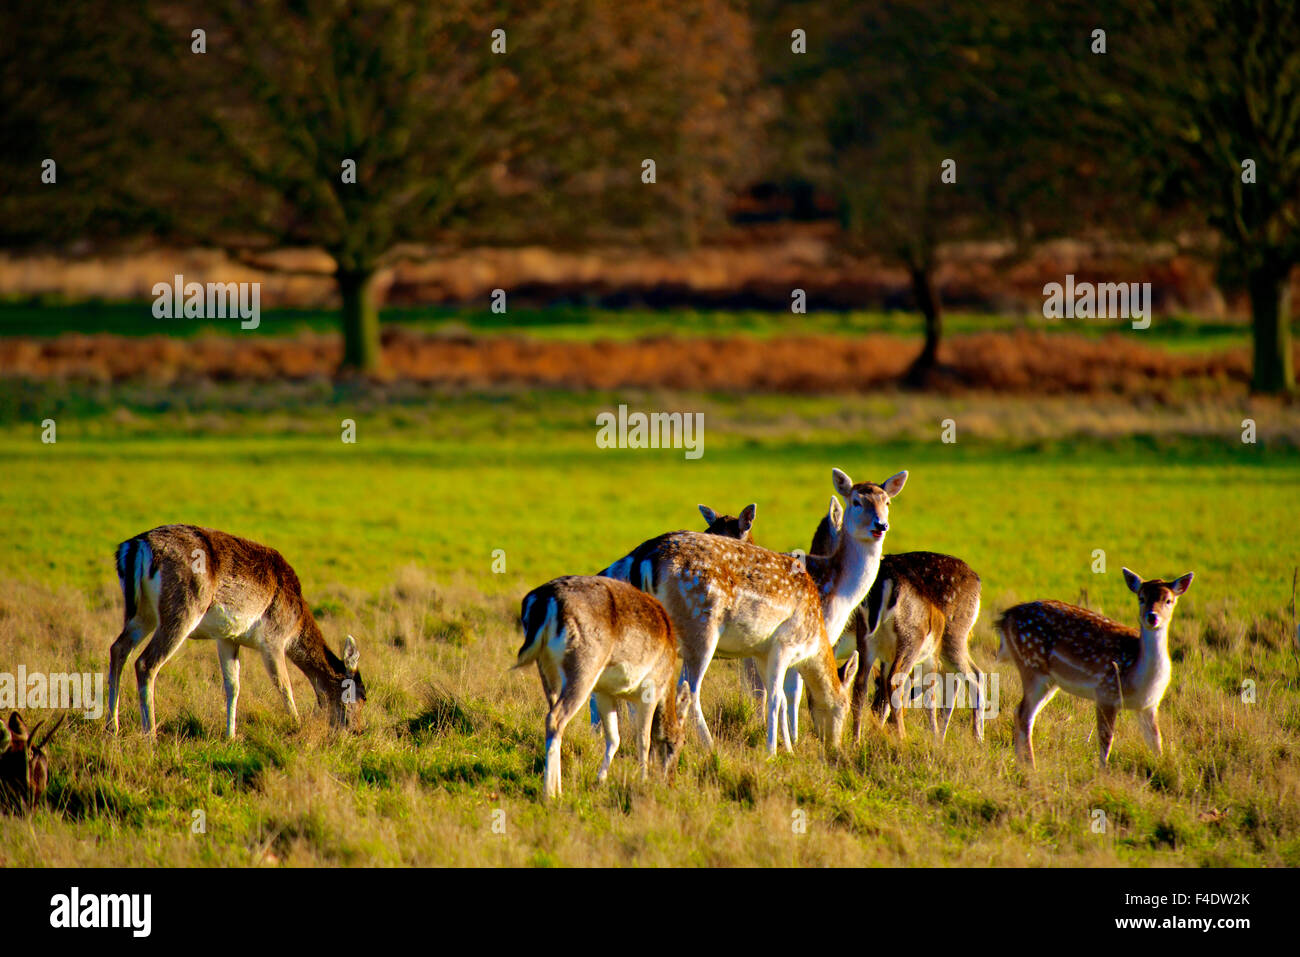 The Fallow deer of Richmond Park, London, share the meadow with the Red Deer. The bucks have palmate antlers. The fallow deer (Dama dama) is a ruminant mammal belonging to the family Cervidae. (Large format sizes available) Stock Photo